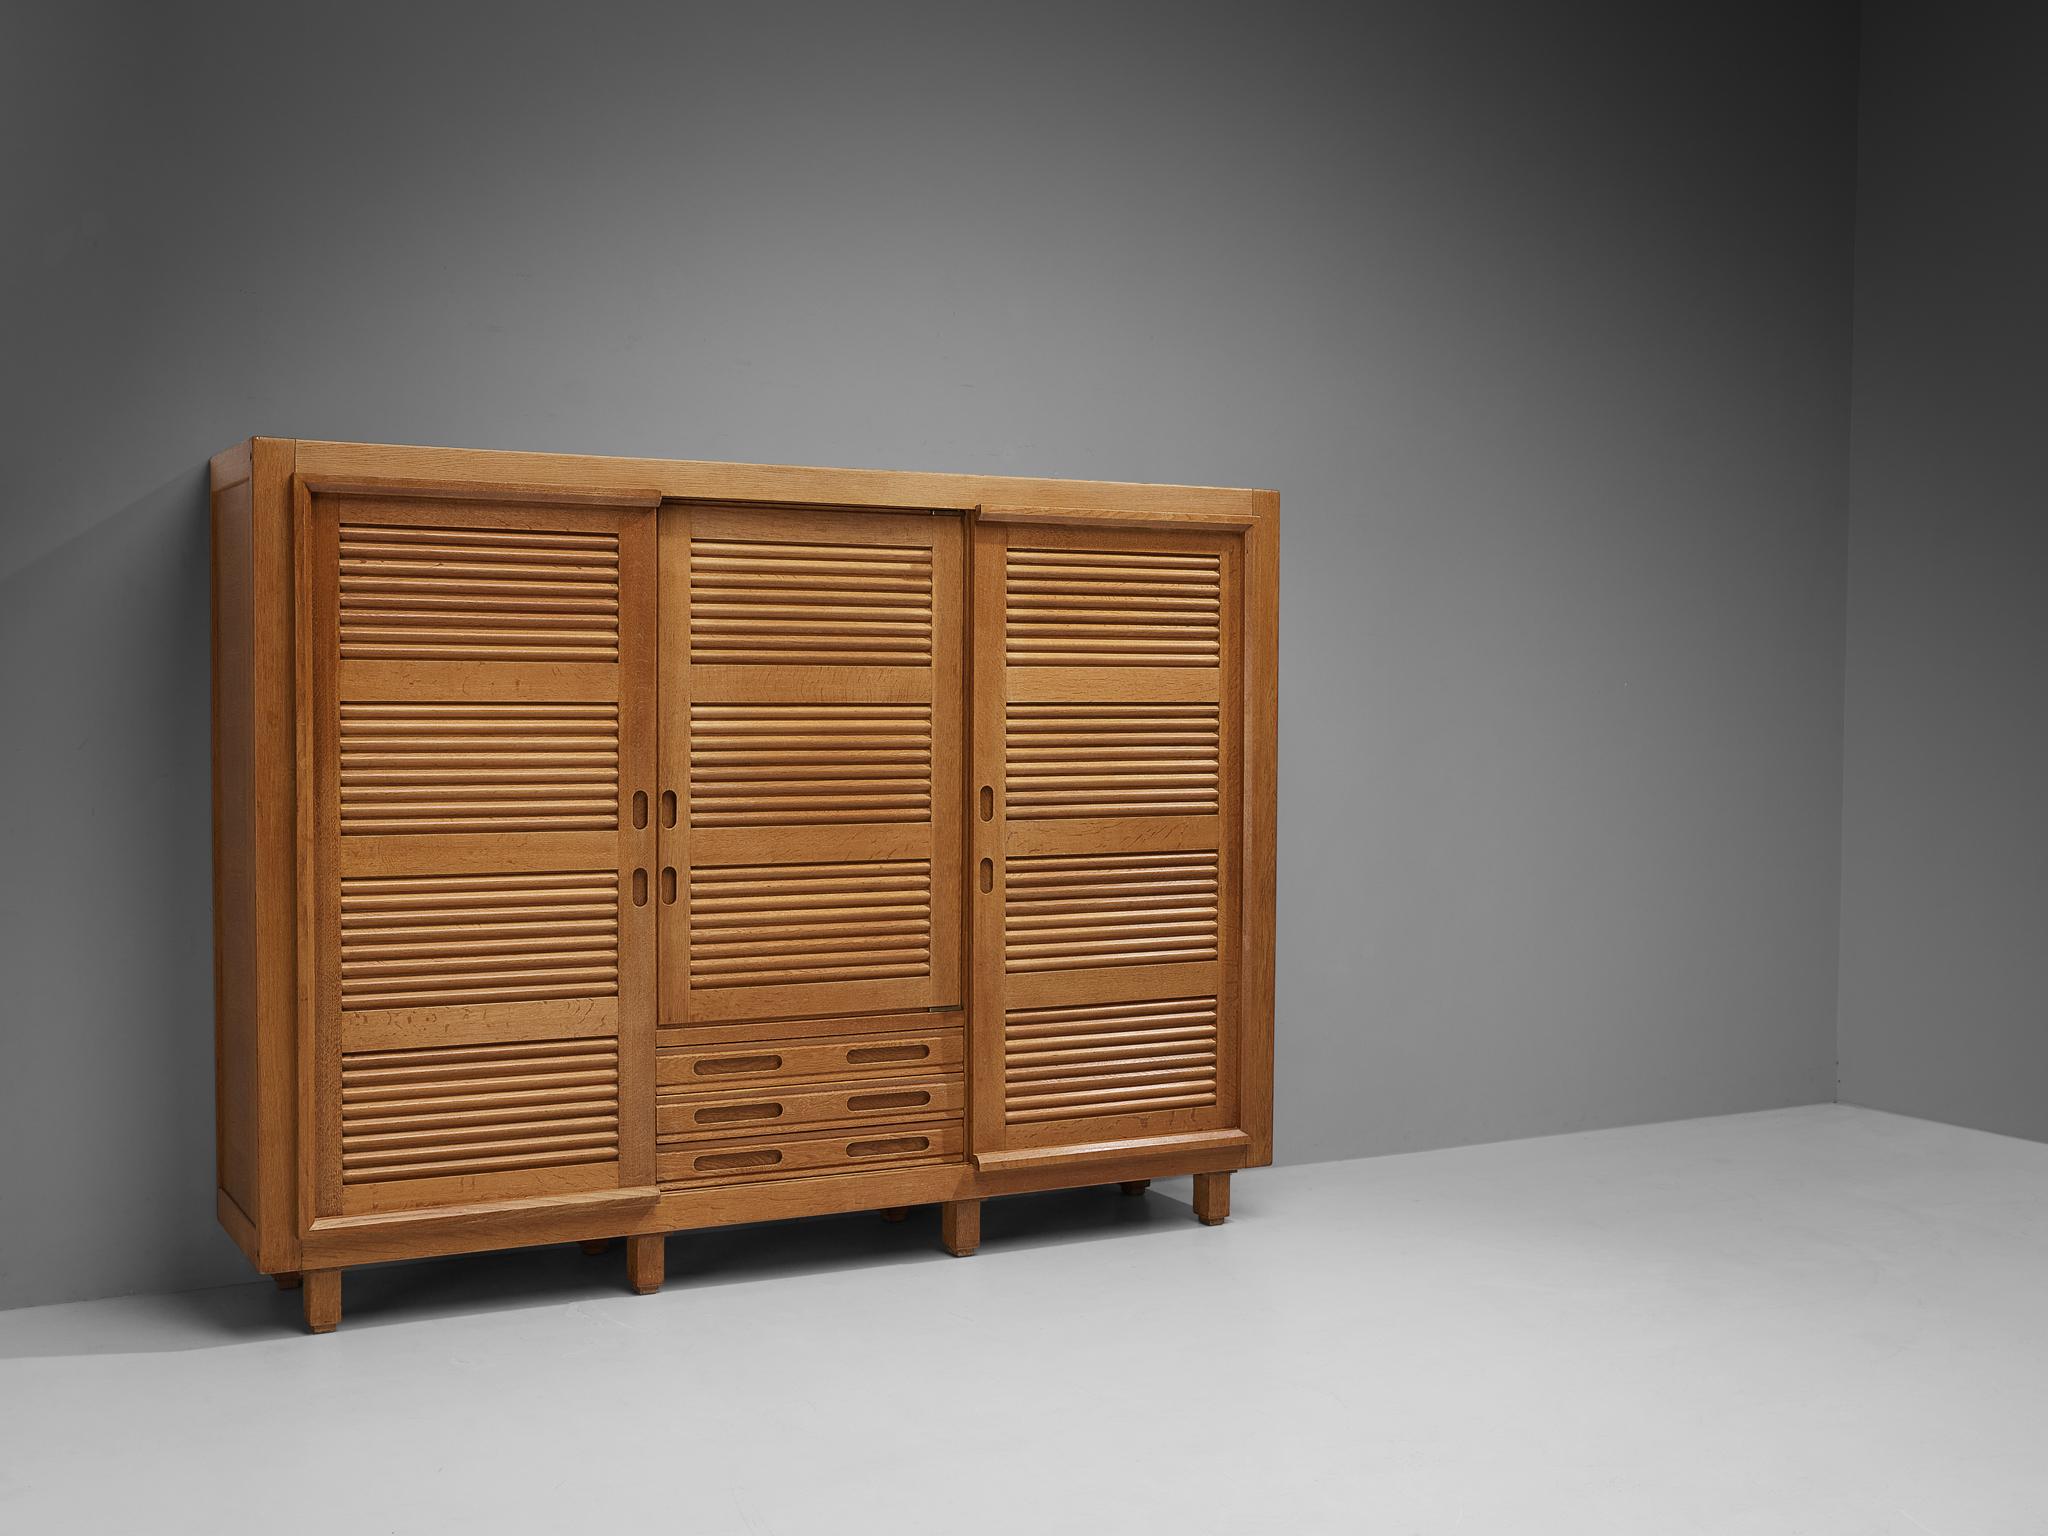 Guillerme et Chambron for Votre Maison, wardrobe, oak, France, 1960s.

This grandiose armoire is a good example of excellent woodwork by virtue of the well-designed construction based on innovative wood joints and geometric shapes that create a